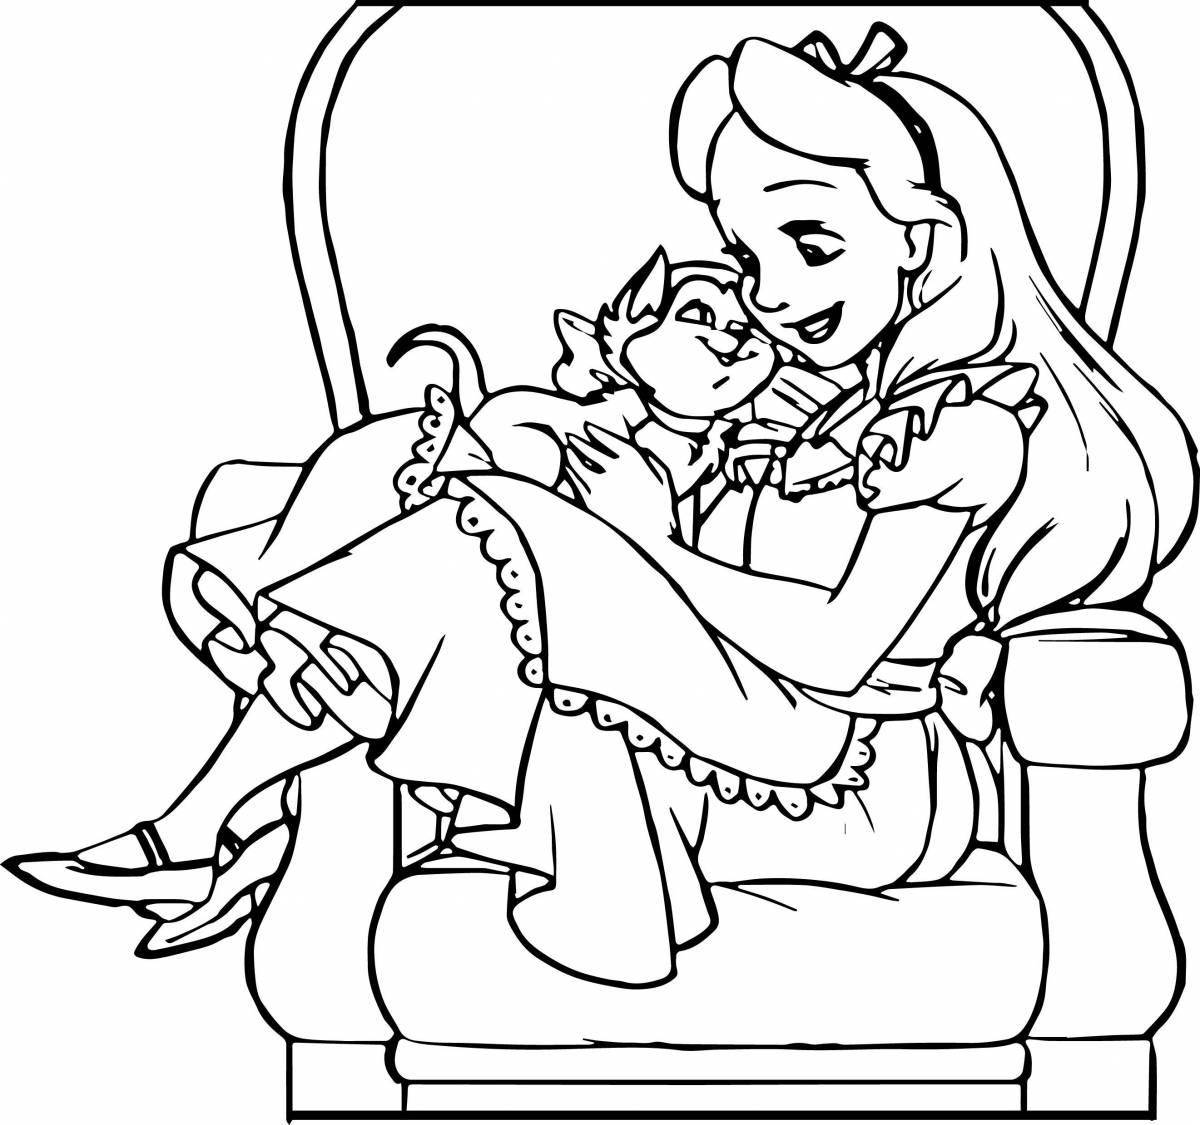 Exquisite keepers of miracles coloring page